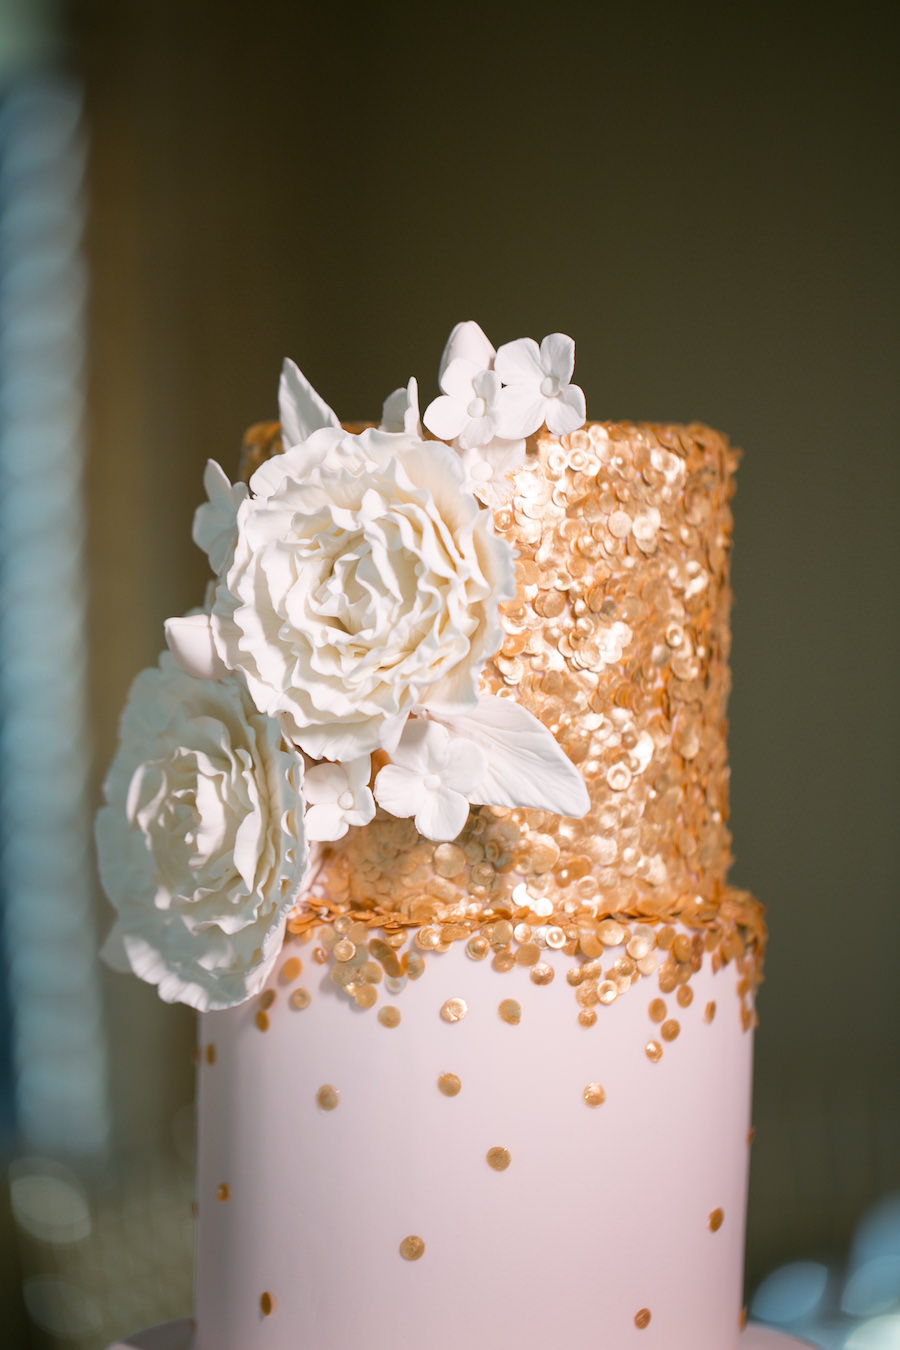 Blush, Gold and Ivory Five Tier Round Wedding Cake with Ivory Sugar Flowers and Gold Confetti Accents | Tampa Wedding Bakery Hands on Sweets | Tampa Bay Wedding Photographer Carrie Wildes Photography